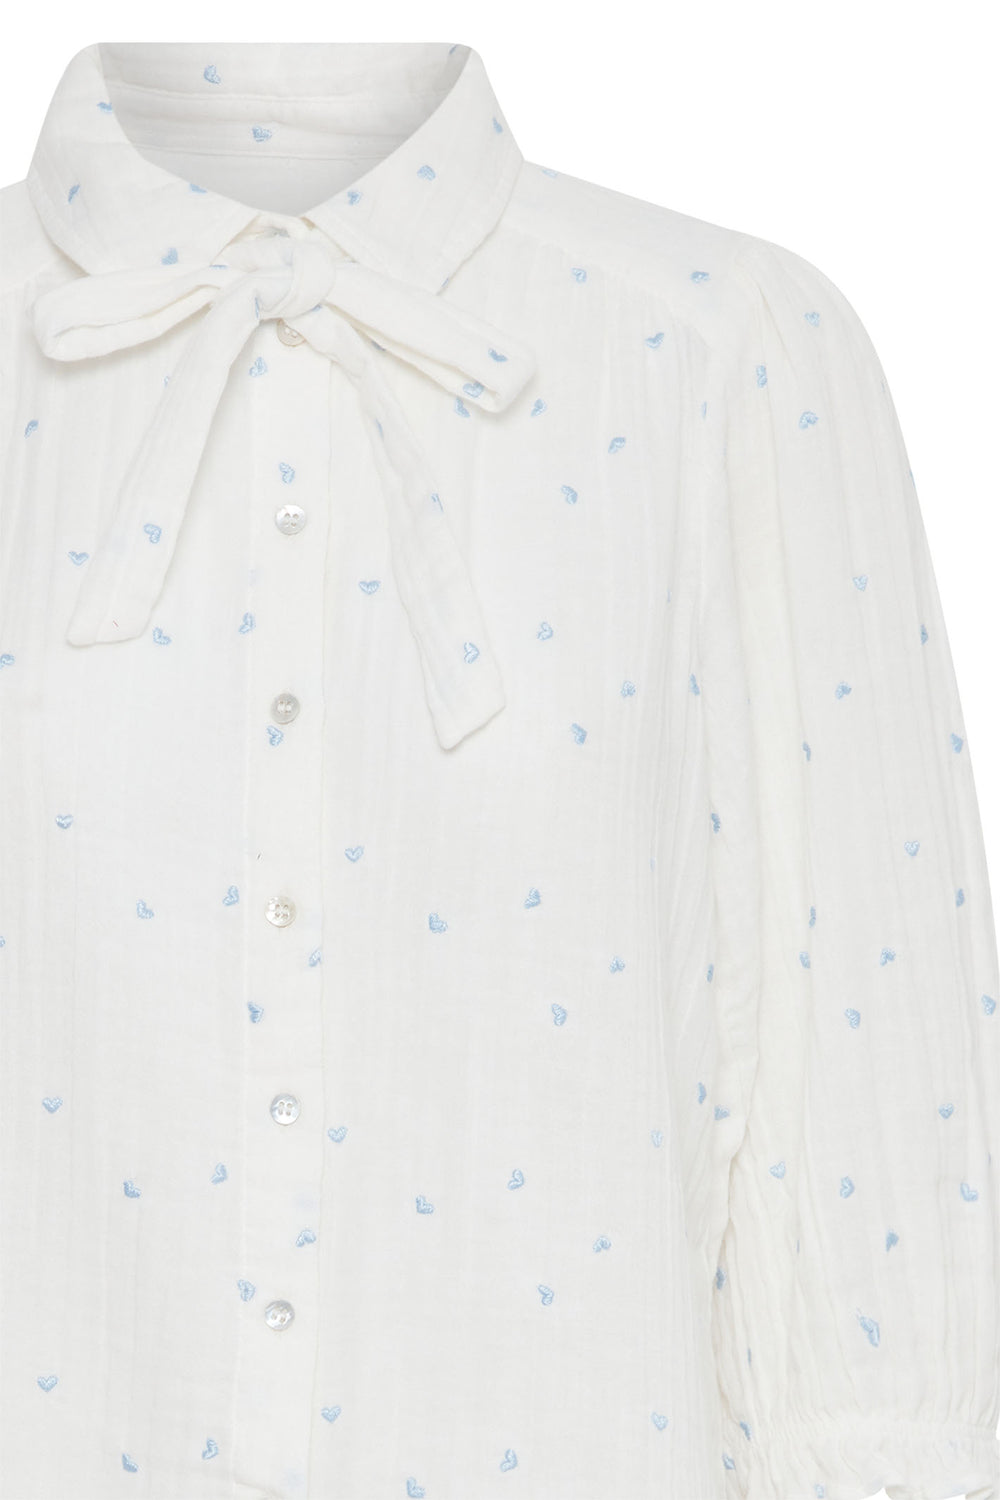 Atelier Reve 20120802 IRCAMILO Snow White Embroidered Heart Blouse - Dotique Chesterfield